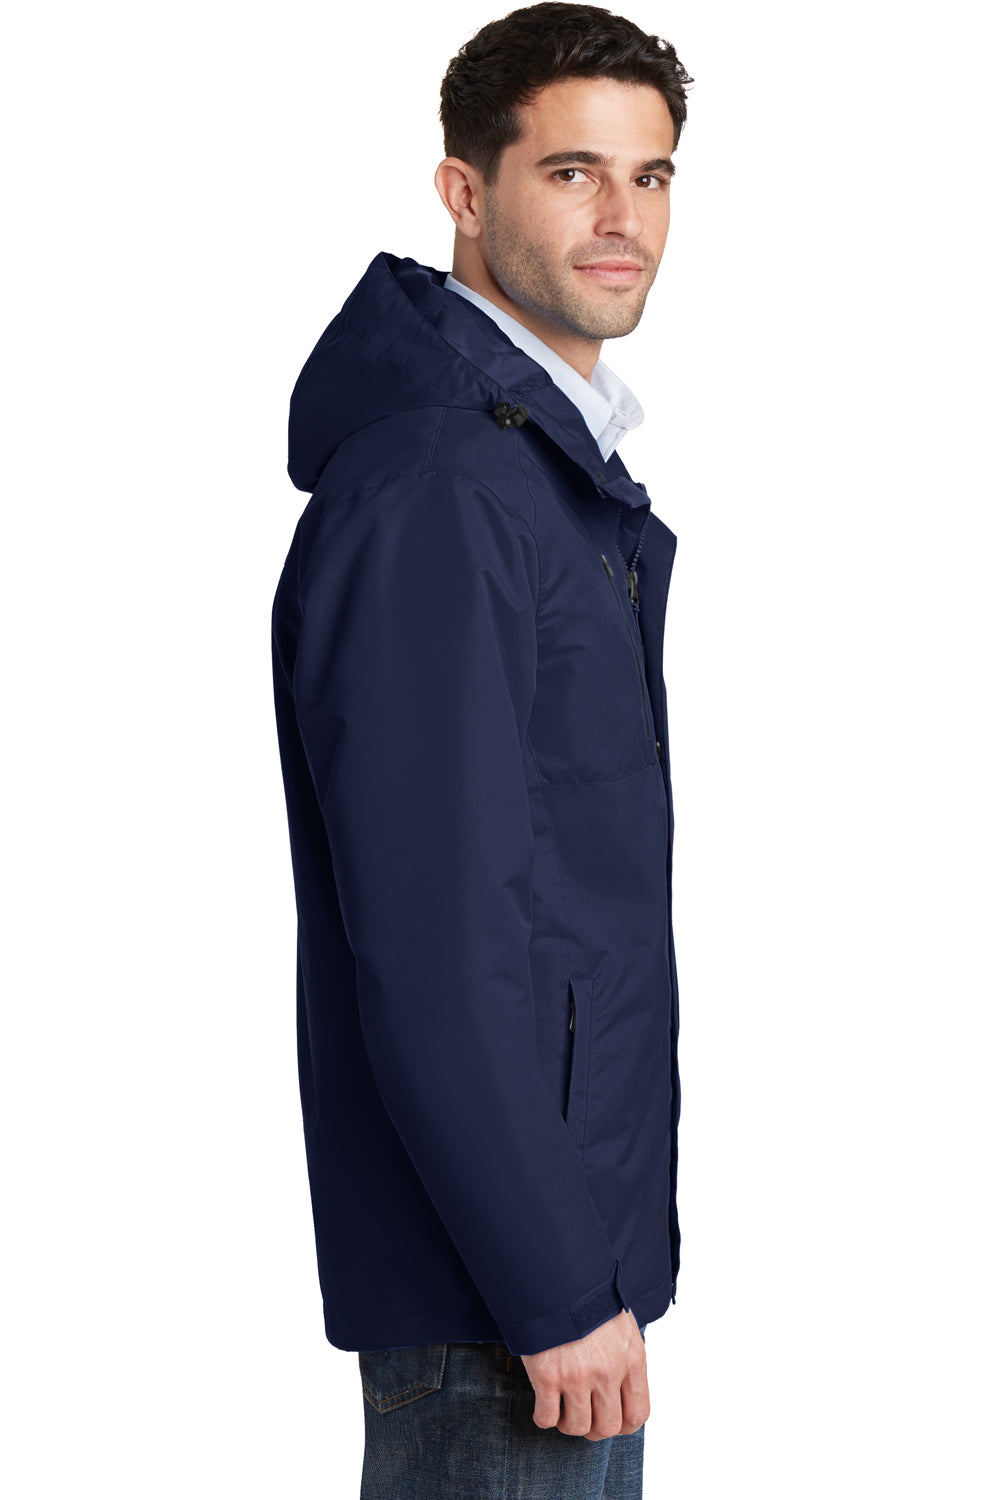 Port Authority J331 Mens All Conditions Waterproof Full Zip Hooded Jacket Navy Blue Side